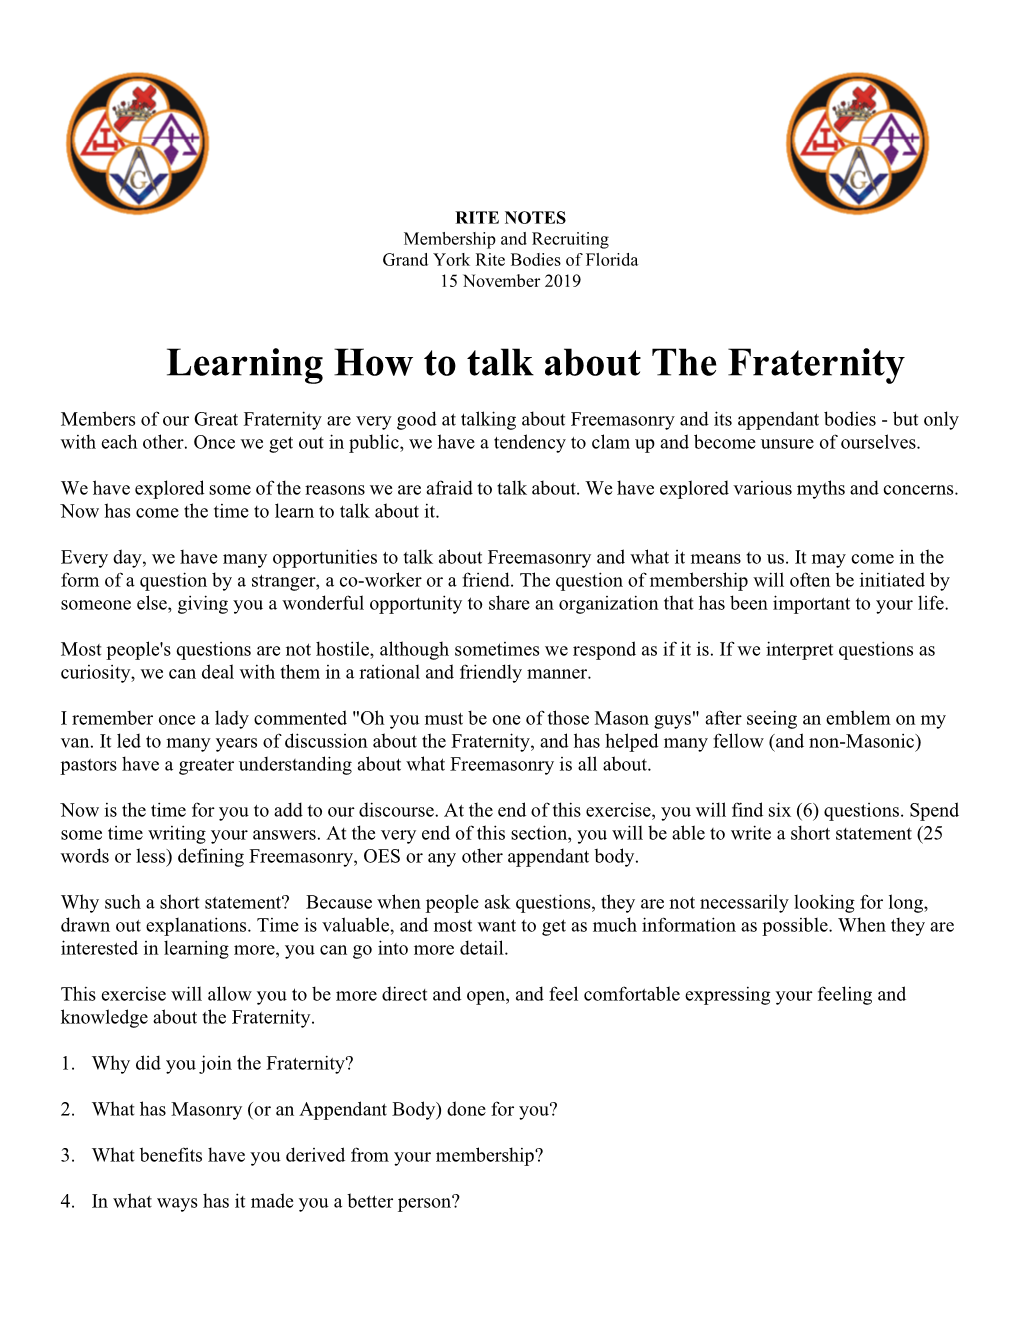 Learning How to Talk About the Fraternity